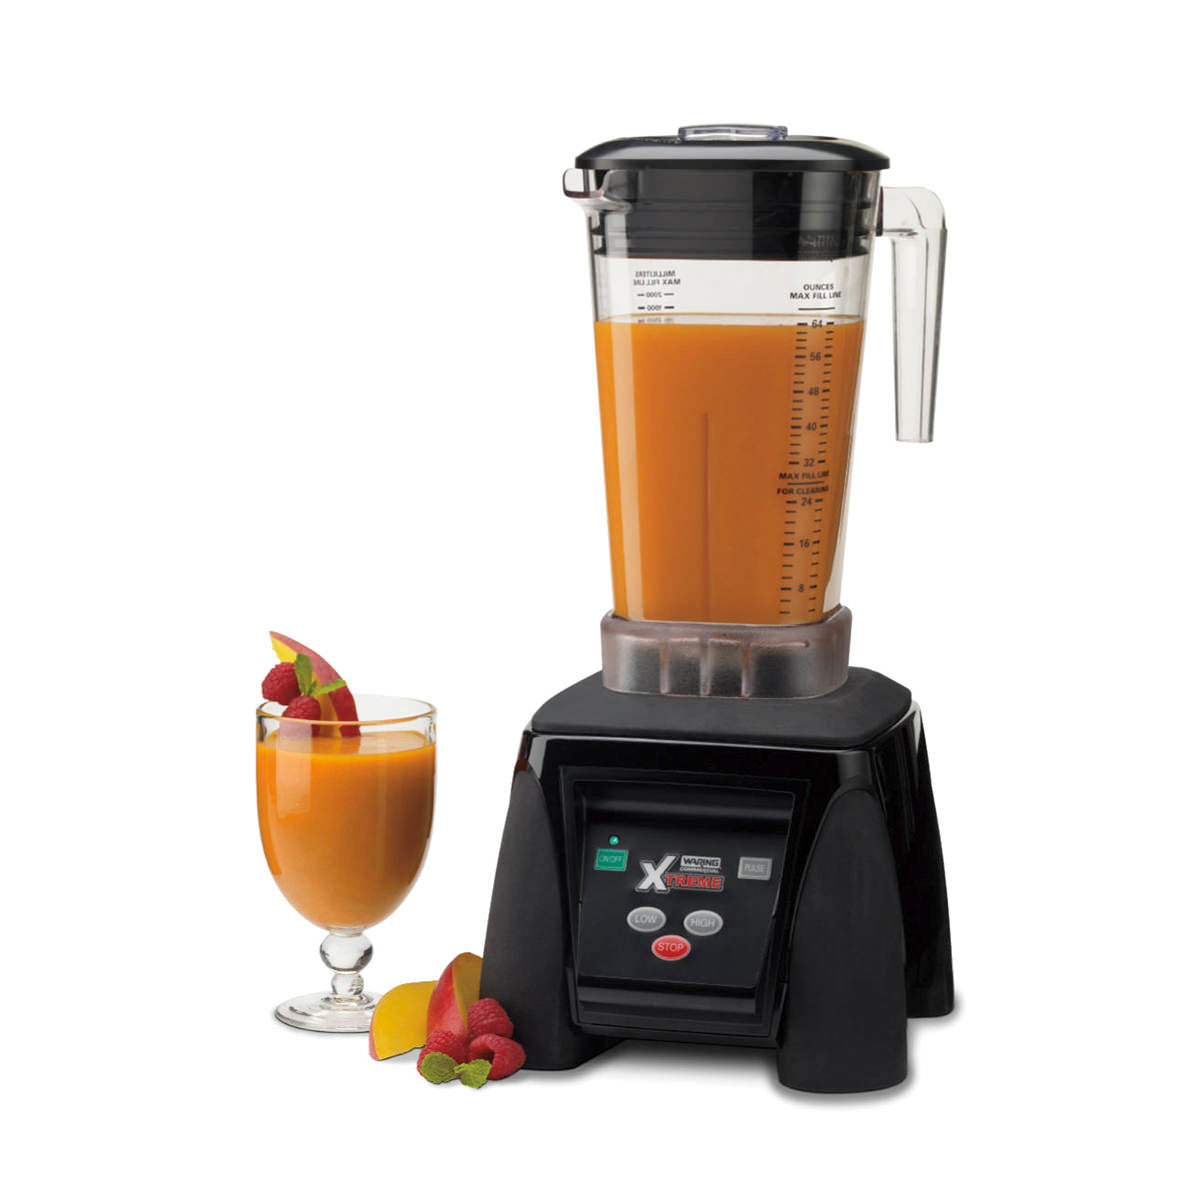 MX1050XTX Heavy-Duty Blender with Electronic Keypad & "The Raptor" 64 oz Copolyester Jar by Waring Commercial